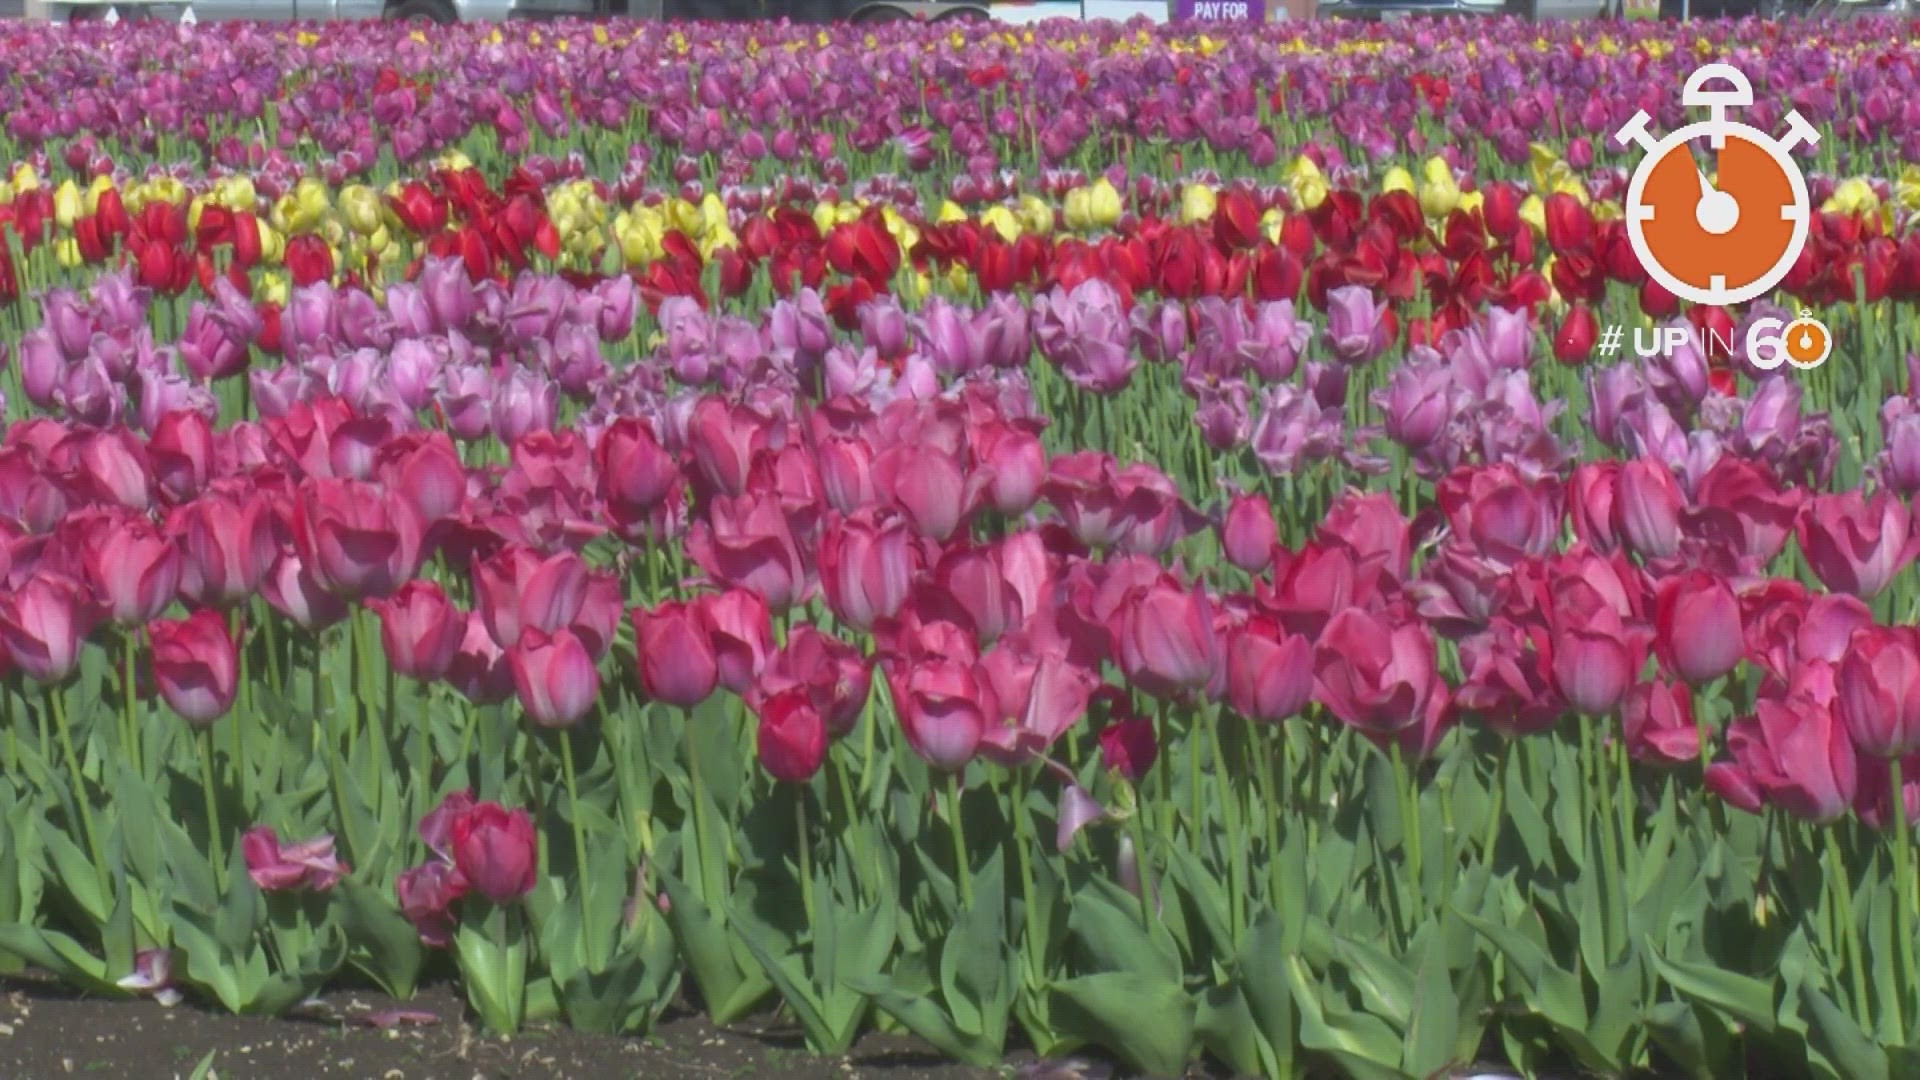 The 5th Tulipalooza festival kicked off on Friday outside the Waxahachie Civic Center with 300,000 tulips in 15 color varieties ready to be picked and “pic’d.”